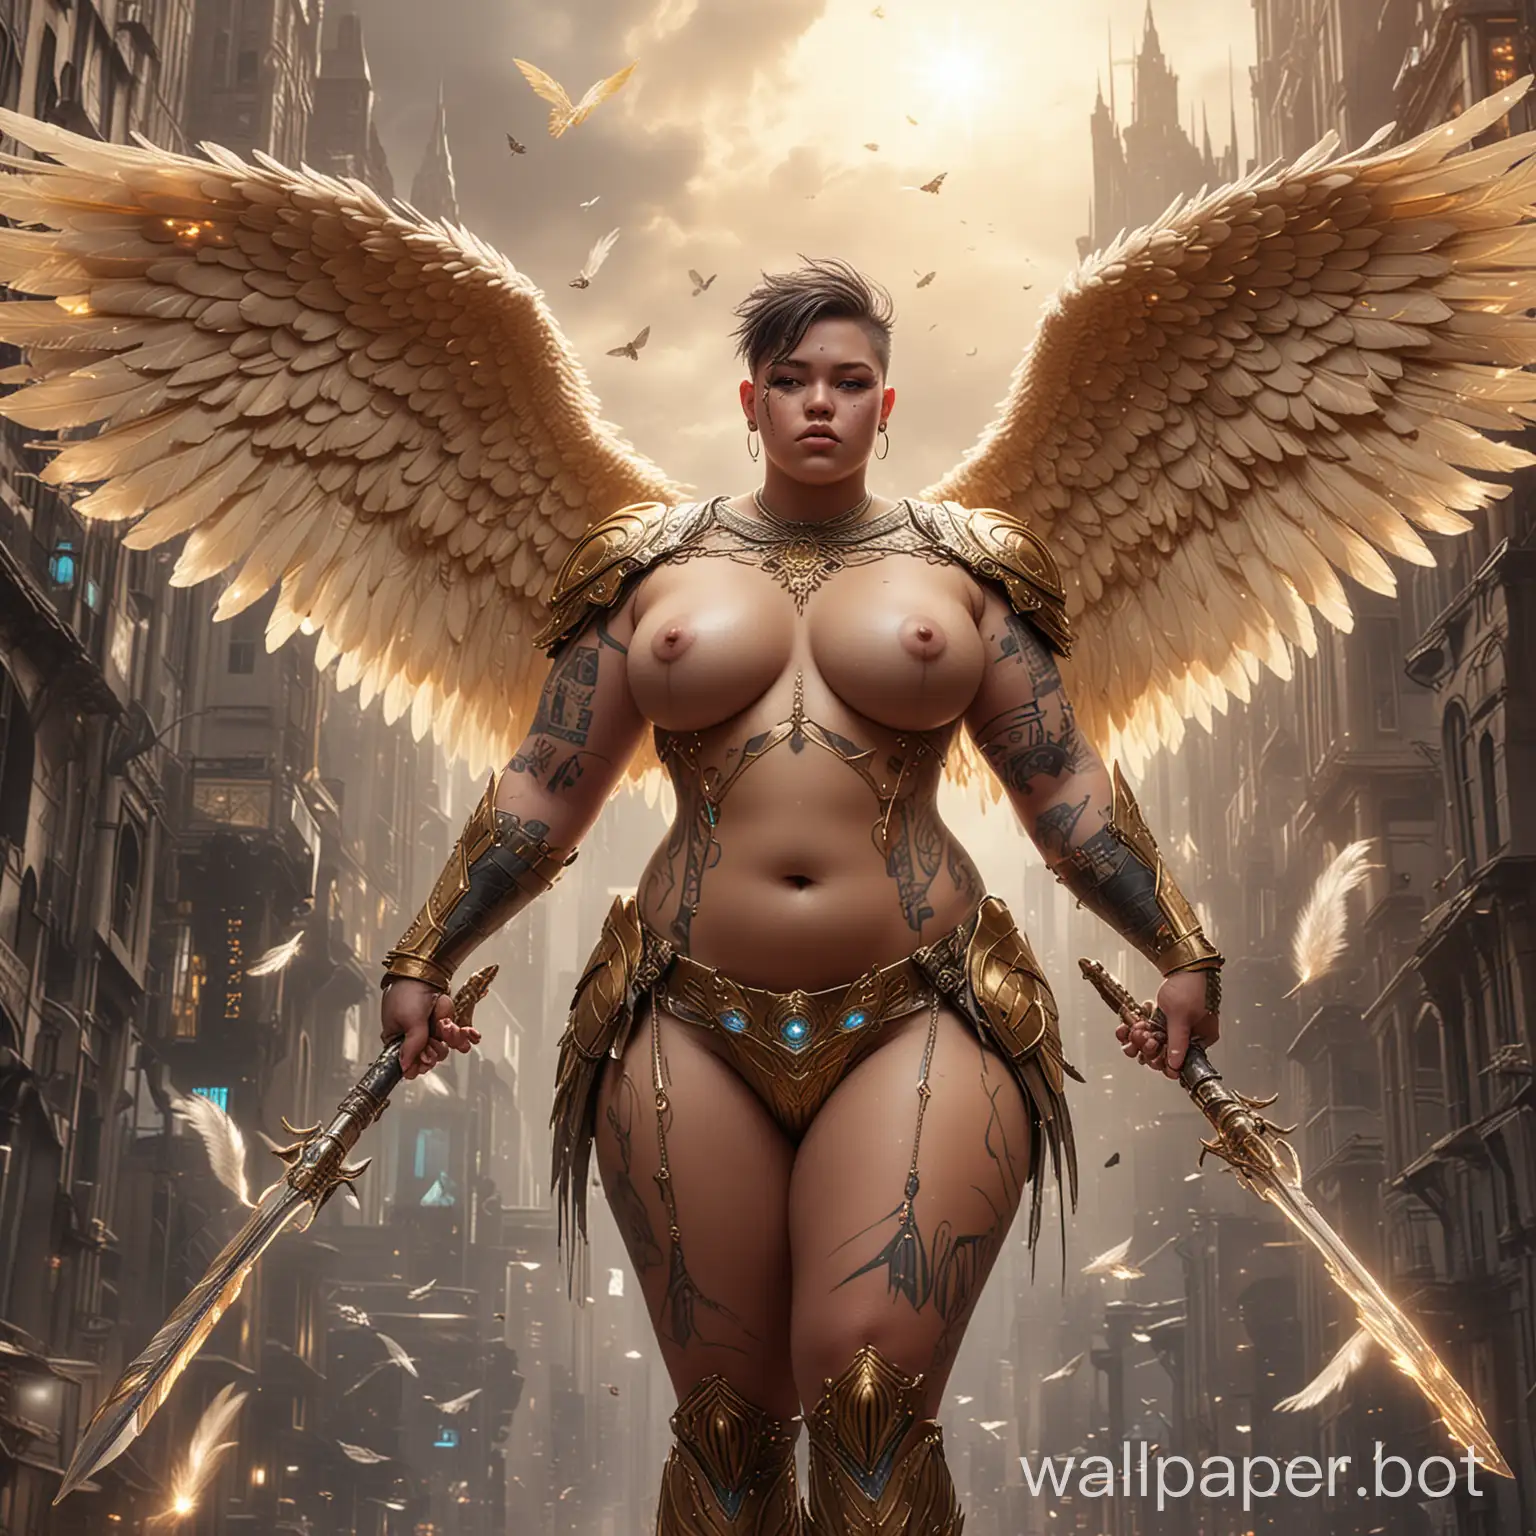 Sci-fi future fat tattooed warrior angel boy with strong arms and exposed chubby breasts with pierced nipples and chubby belly wearing minimal armor with iridescent wings with gold tipped feathers, hovering in flight and glowing with angelic power holding an aetheric magical staff, posing in front of a magical futuristic city landscape